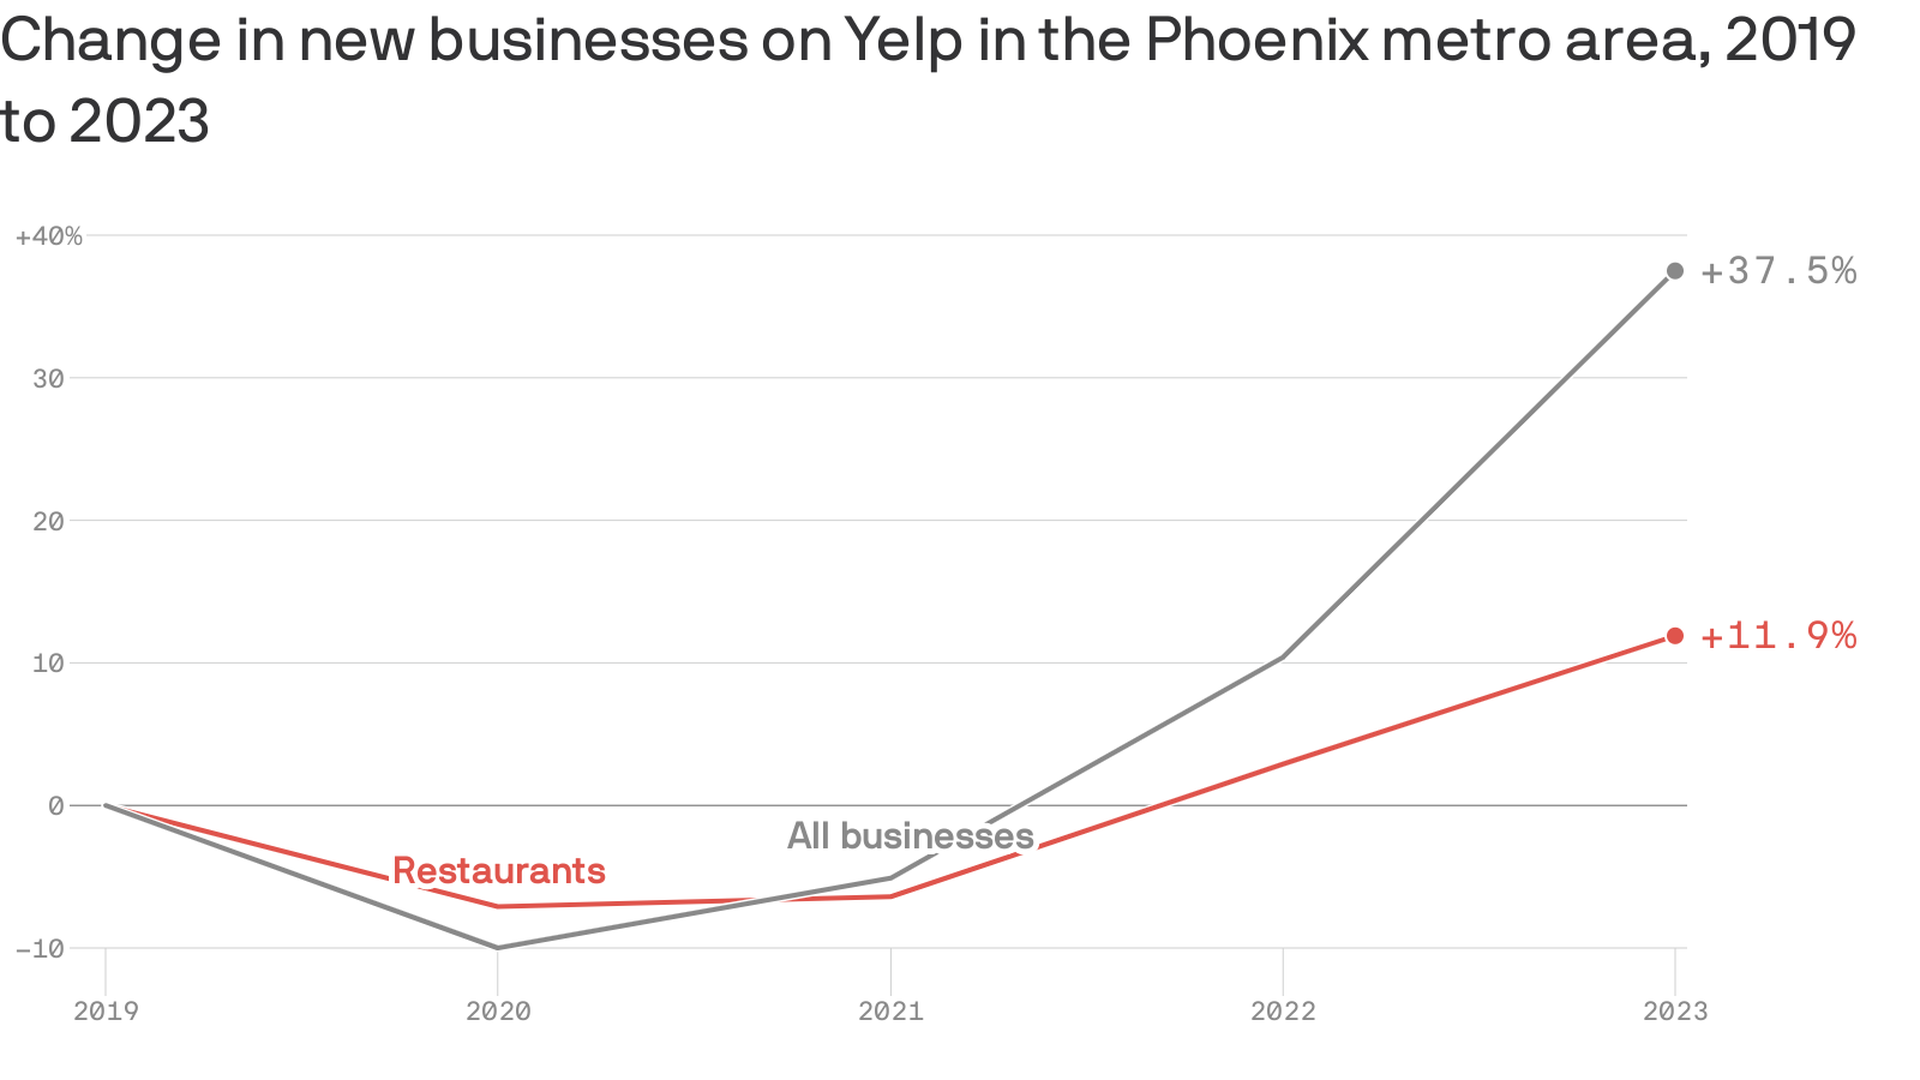 A line chart showing change in new businesses on Yelp in the Phoenix metro area from 2019 to 2023.